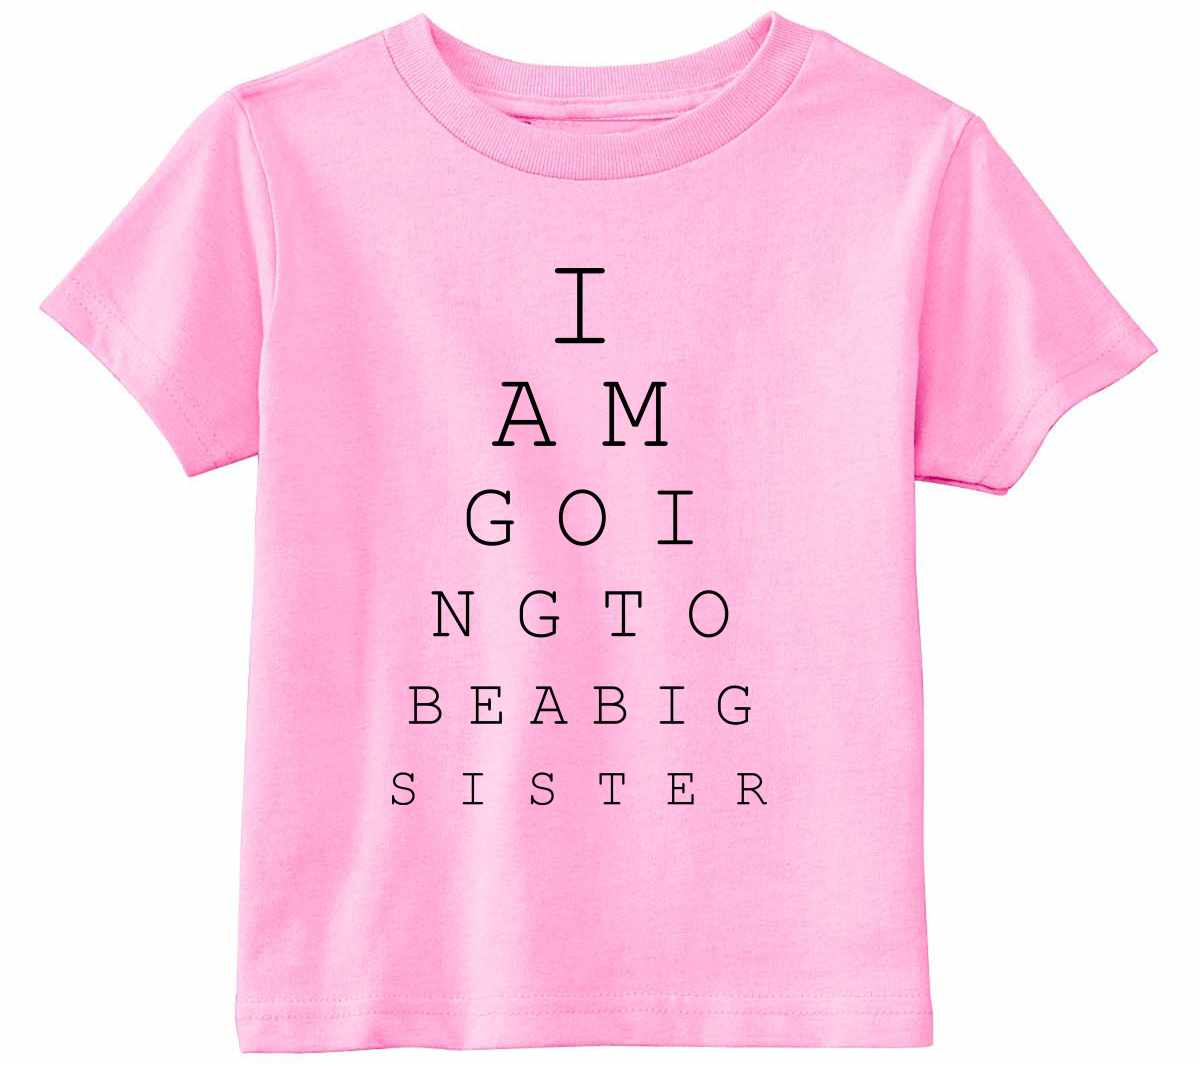 I AM GOING TO BE A BIG SISTER EYECHART Infant/Toddler  (#1160-7)